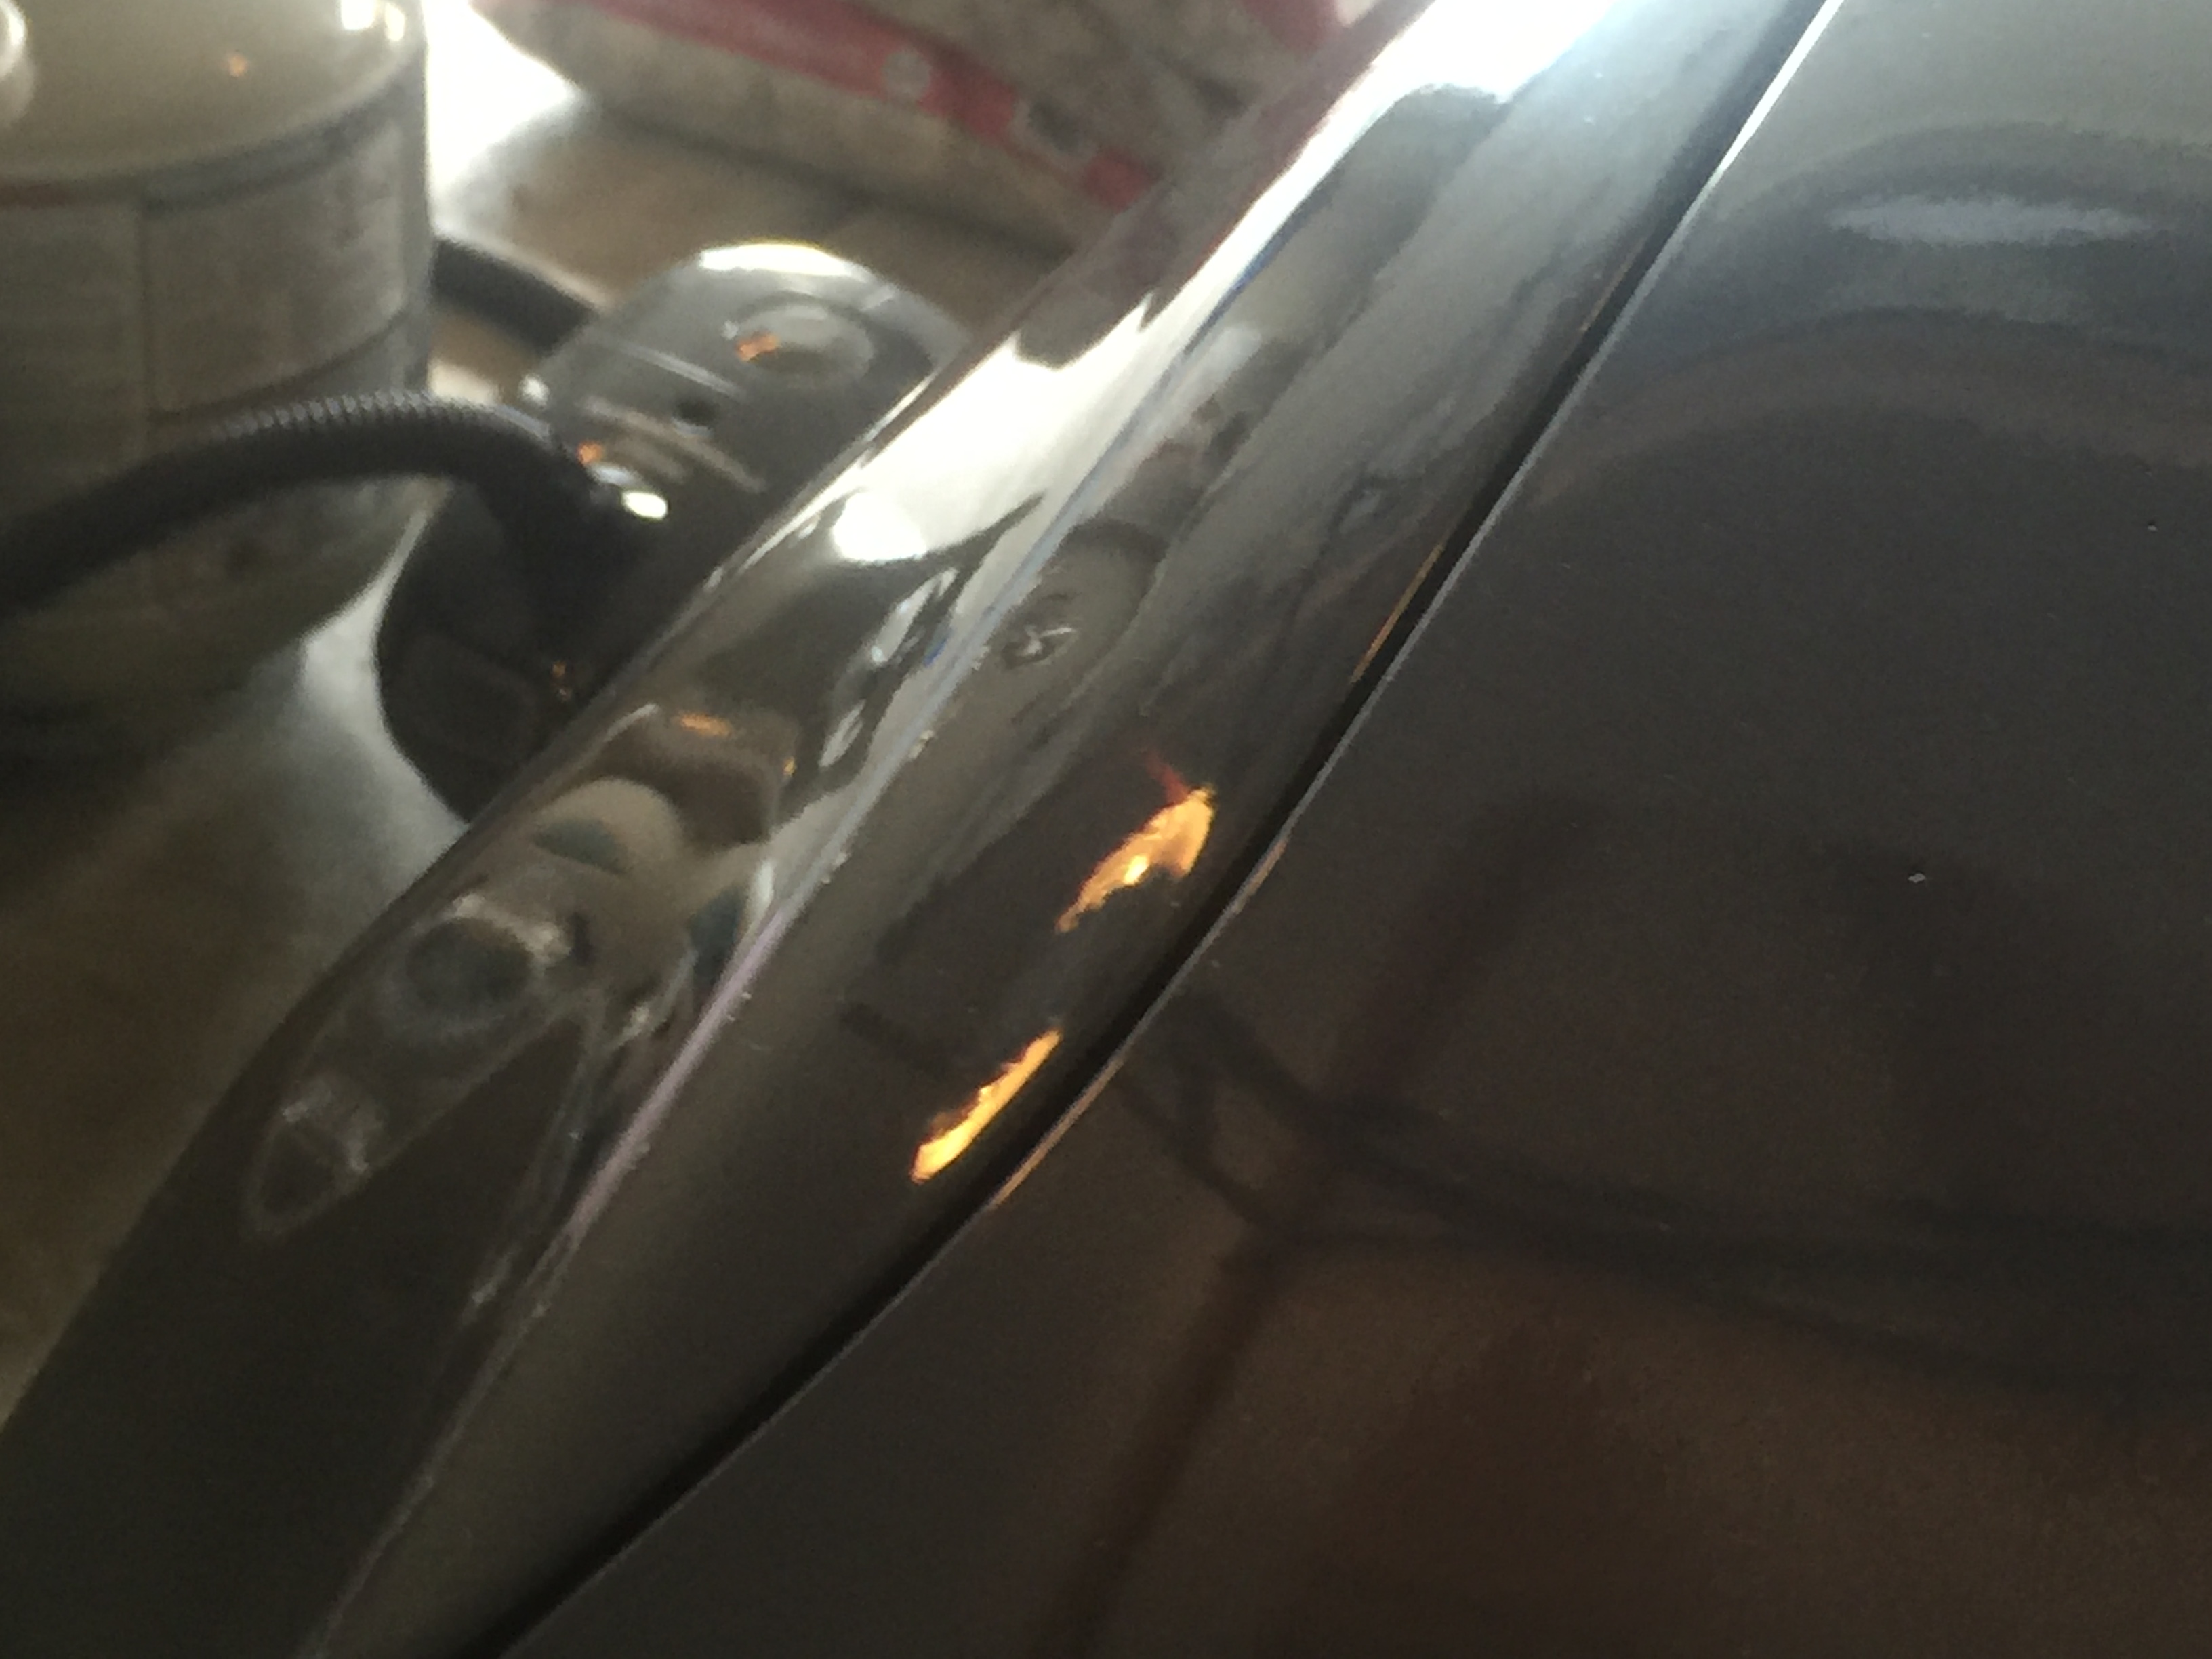 2011 Kia Optima Fender dent repair, with paintless dent removal process, large dent repair, in Springfield, IL. https://217dent.com